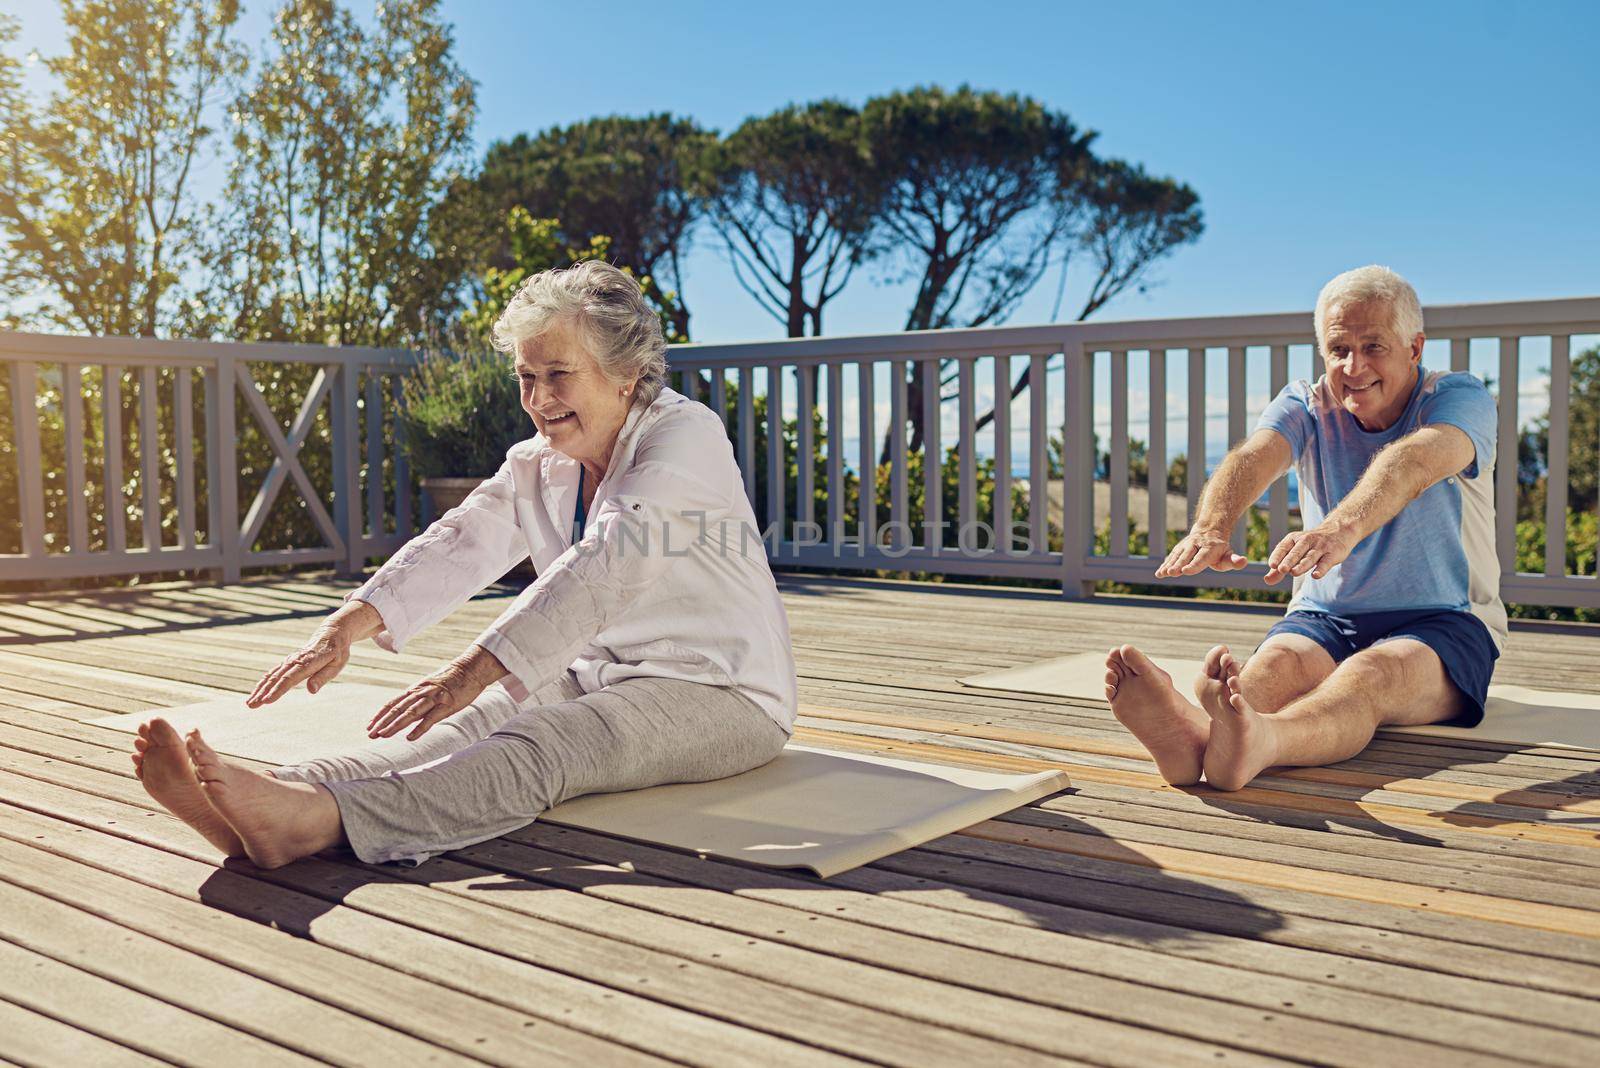 Shot of a senior couple doing yoga together on their patio outside.